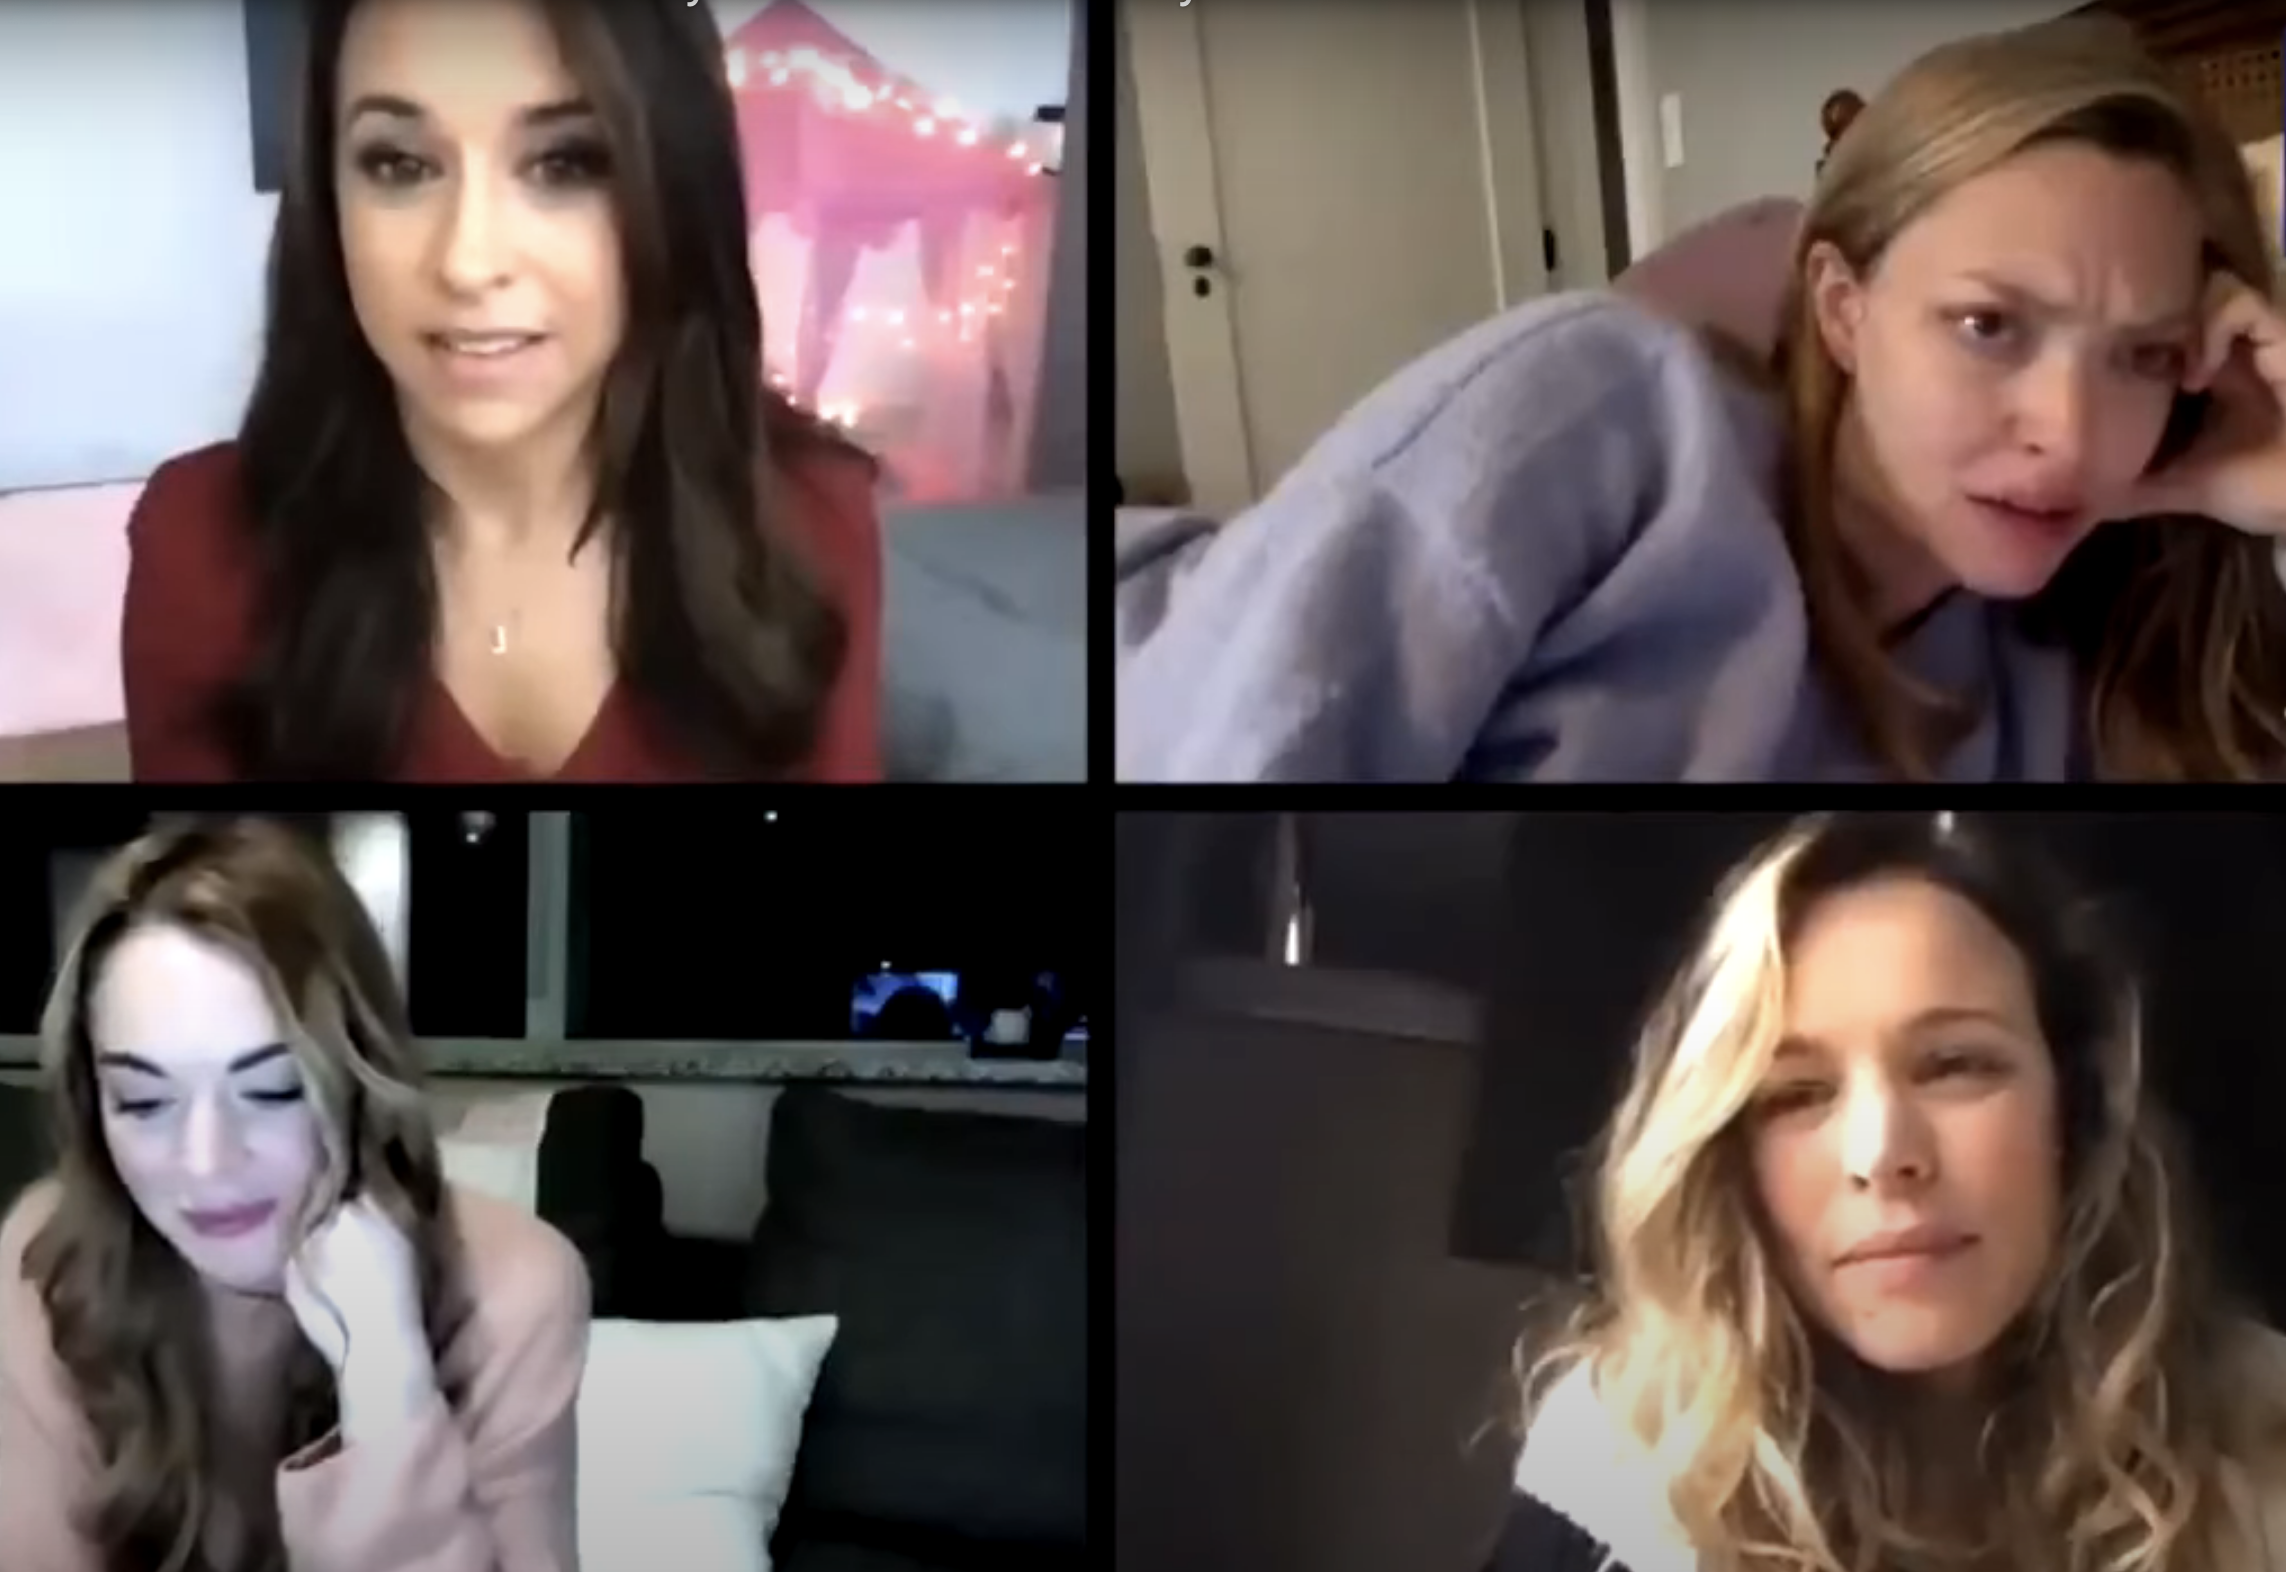 the four women on Zoom together